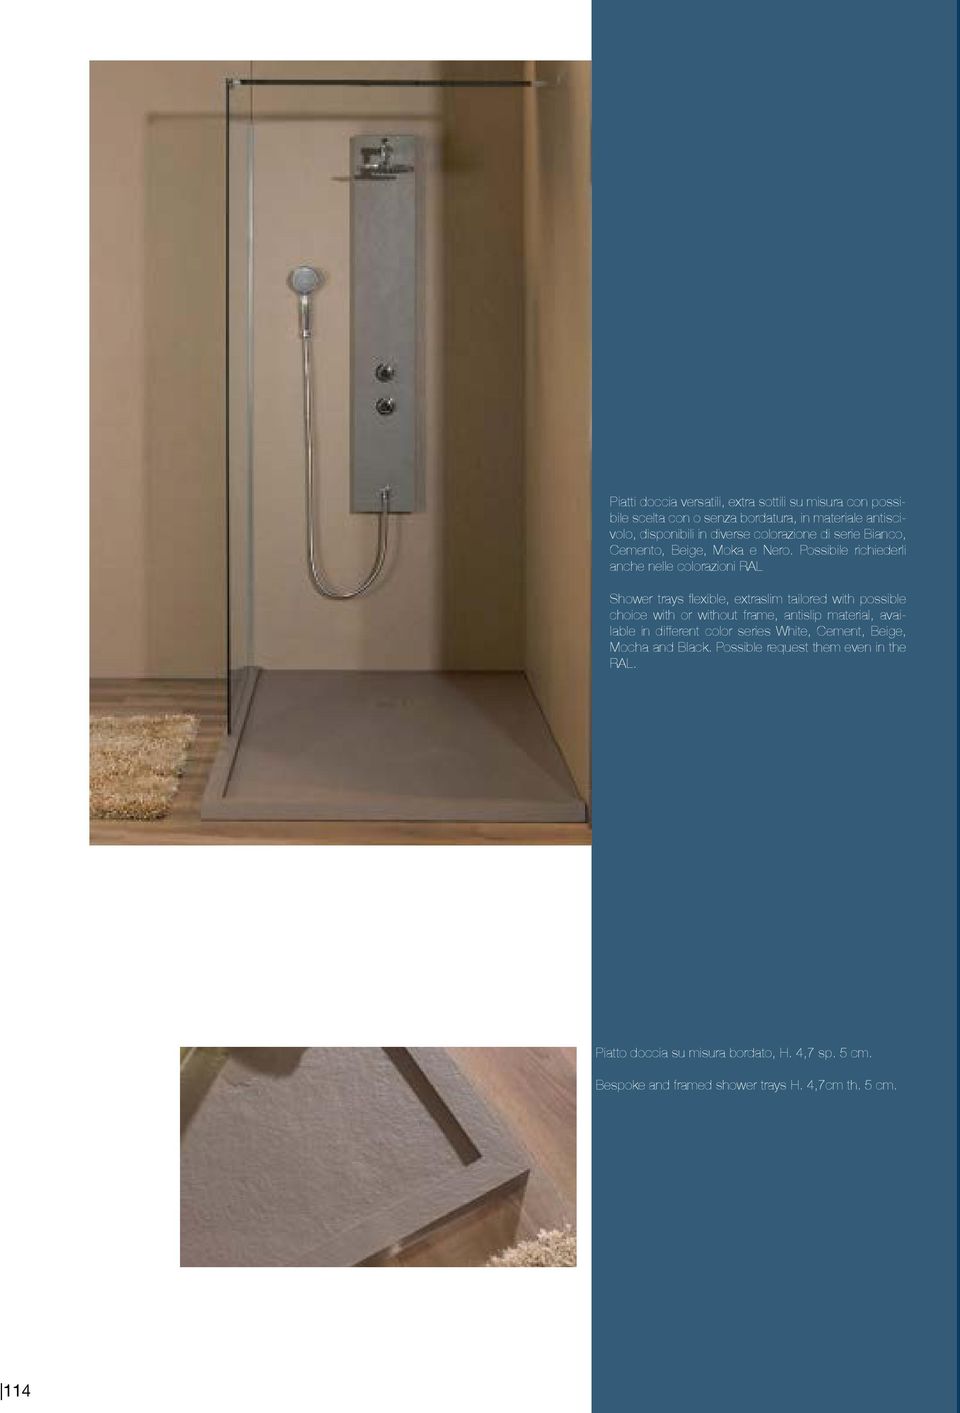 Possibile richiederli anche nelle colorazioni RAL Shower trays flexible, extraslim tailored with possible choice with or without frame,